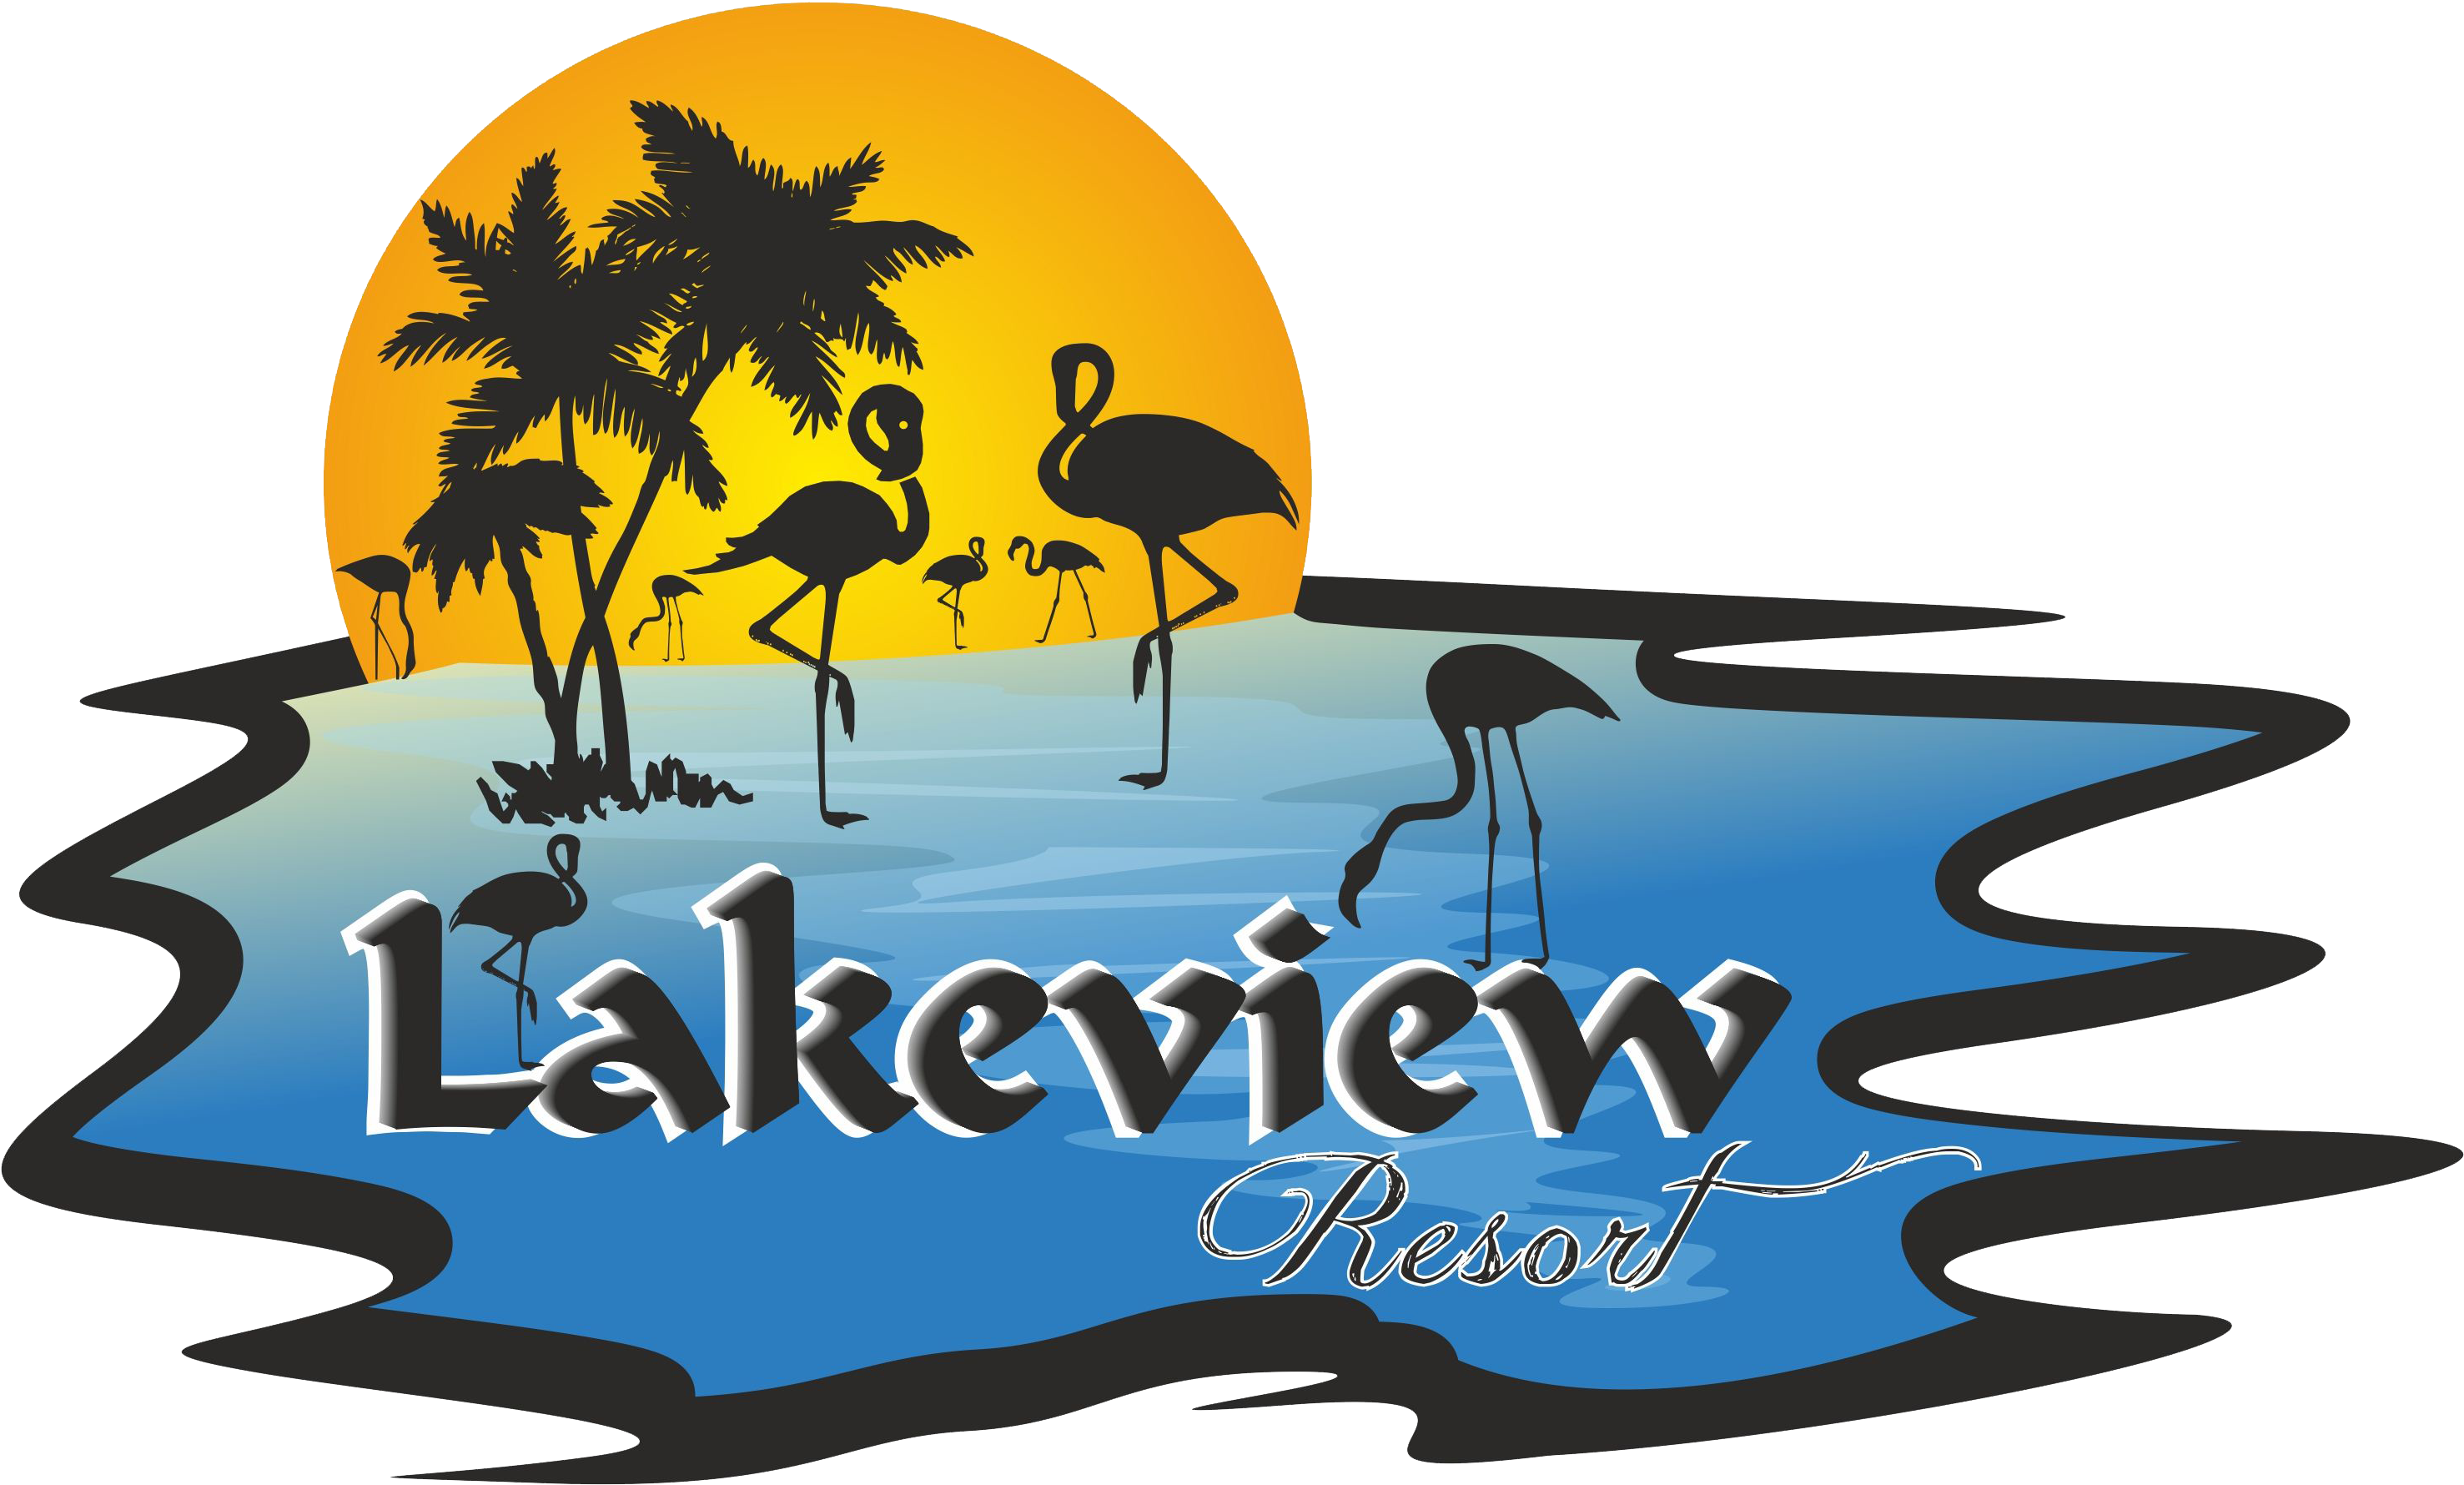 Lakeview Resort - Print And Dcor Group Of Palm Trees Wall Decal Art Leaning (3051x1924)